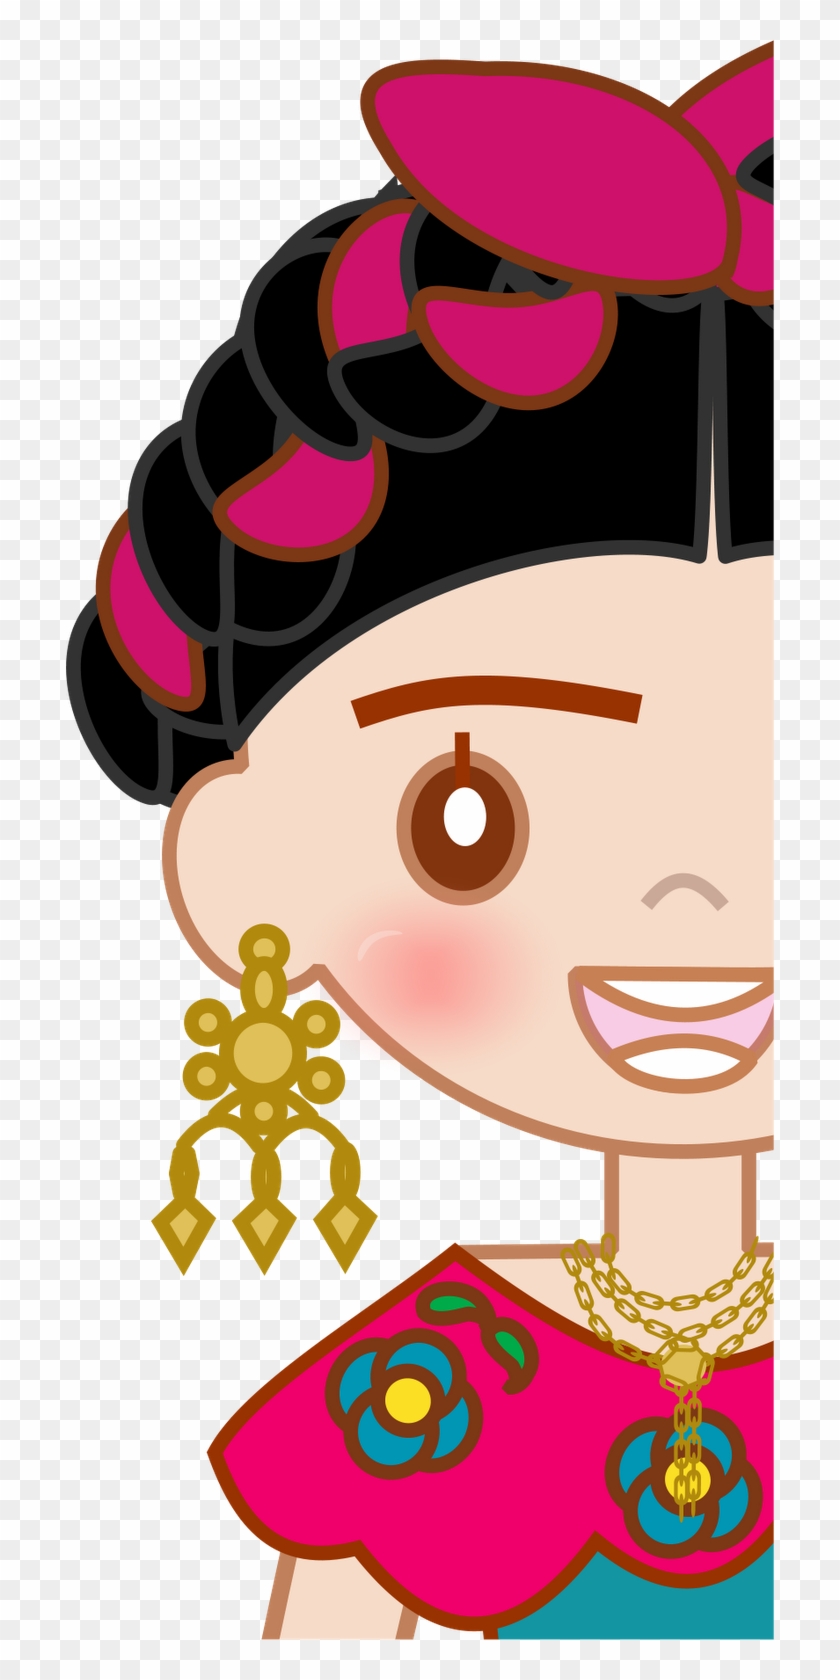 Please Click On Image To See Real Size - Frida Kahlo Elements Png #551043